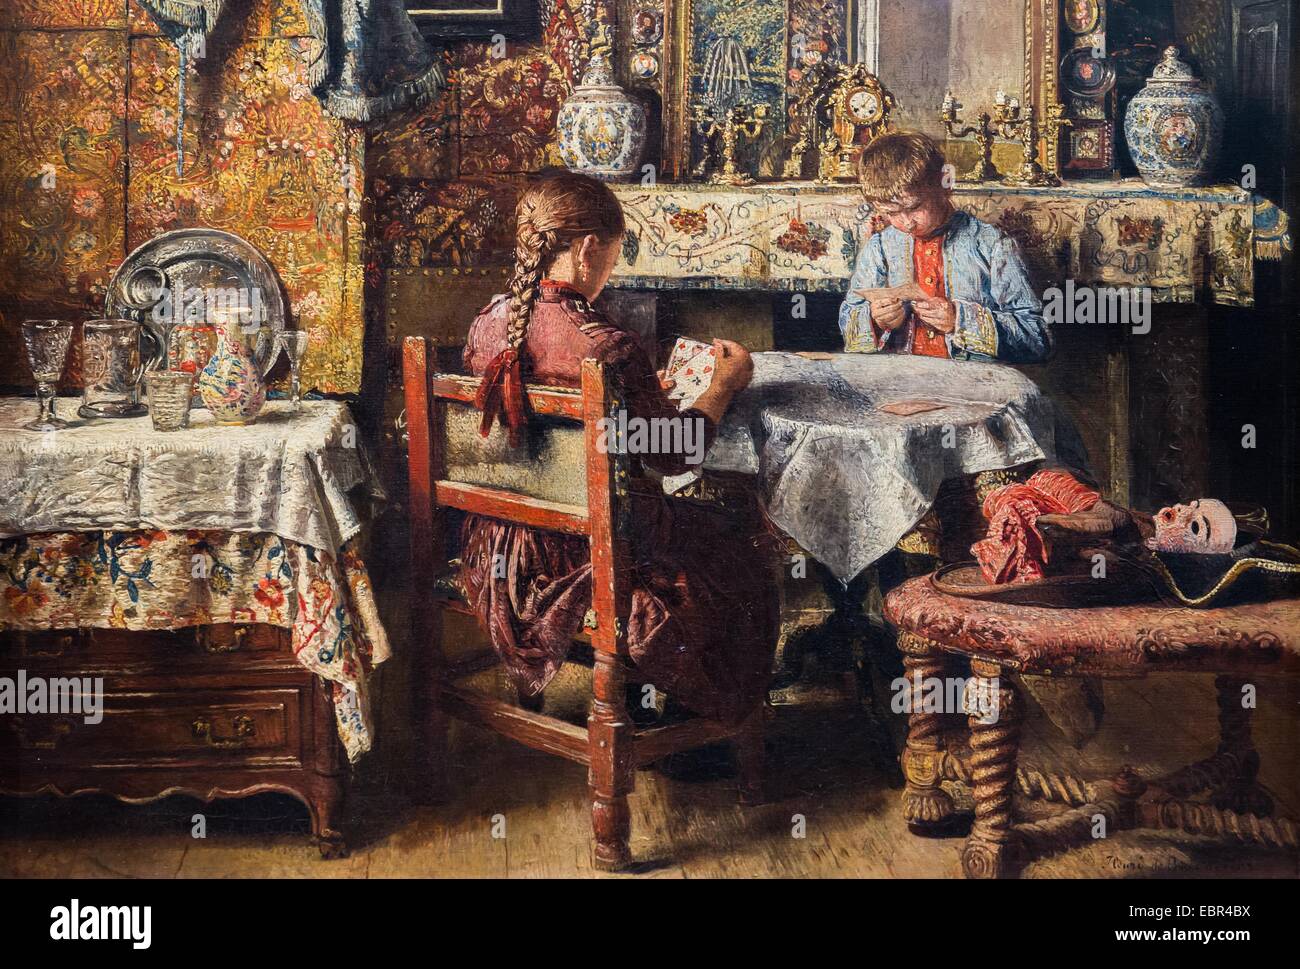 The Game of Cards, 1887 - Henri de Braekeleer Oil on Canvas 23/02/2014  -   / 19th century Collection / Active Museum Stock Photo